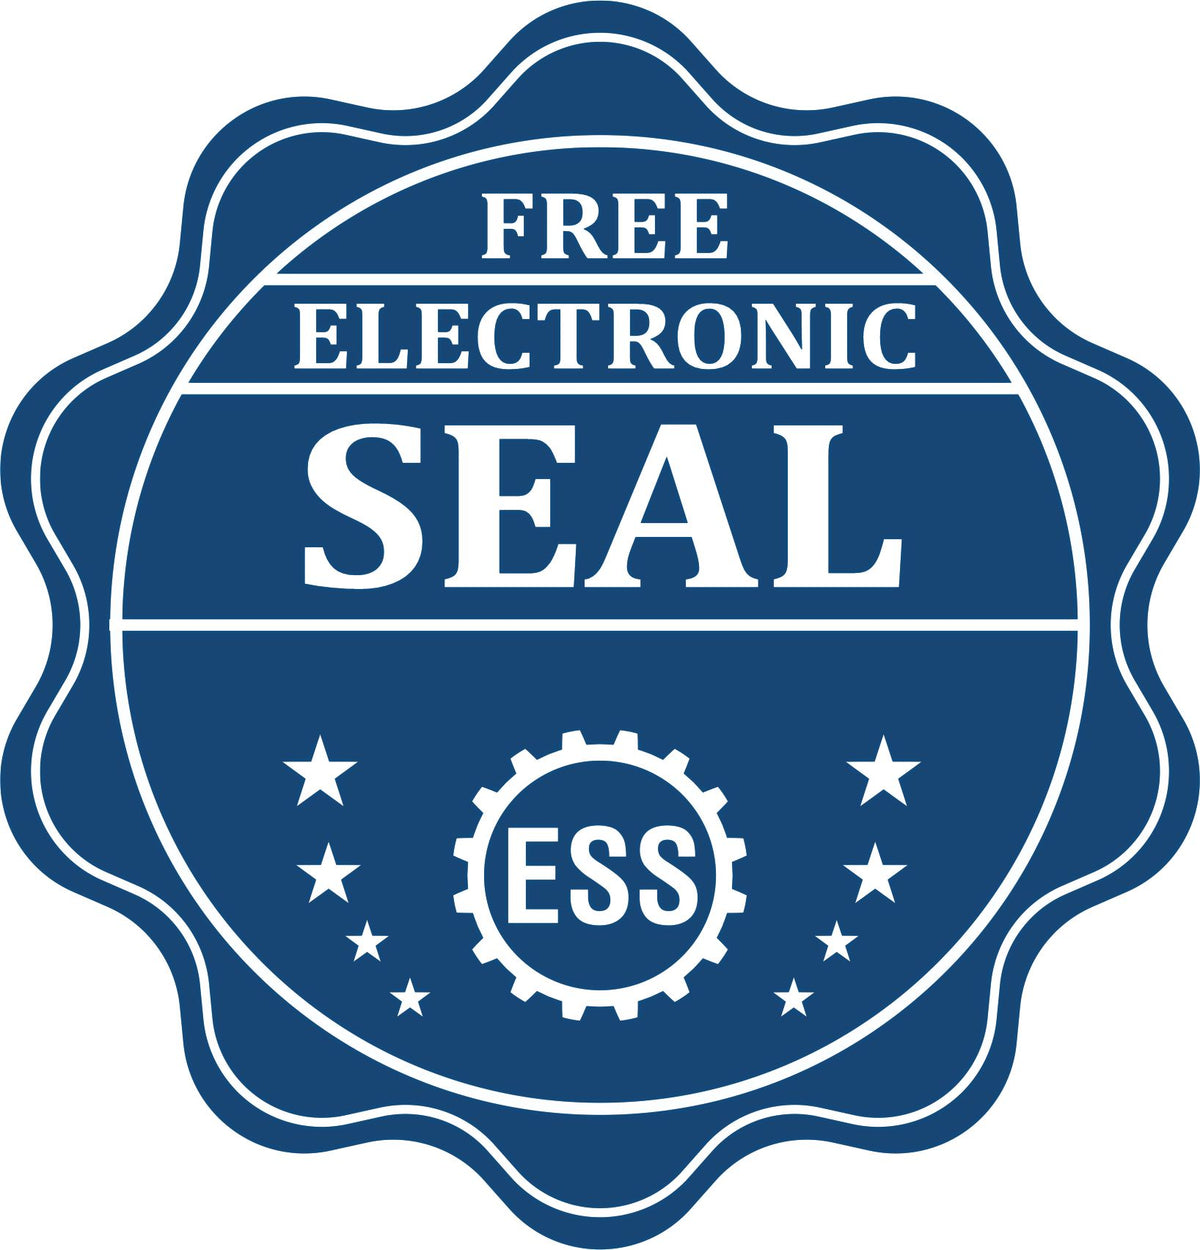 A badge showing a free electronic seal for the Missouri Desk Architect Embossing Seal with stars and the ESS gear on the emblem.